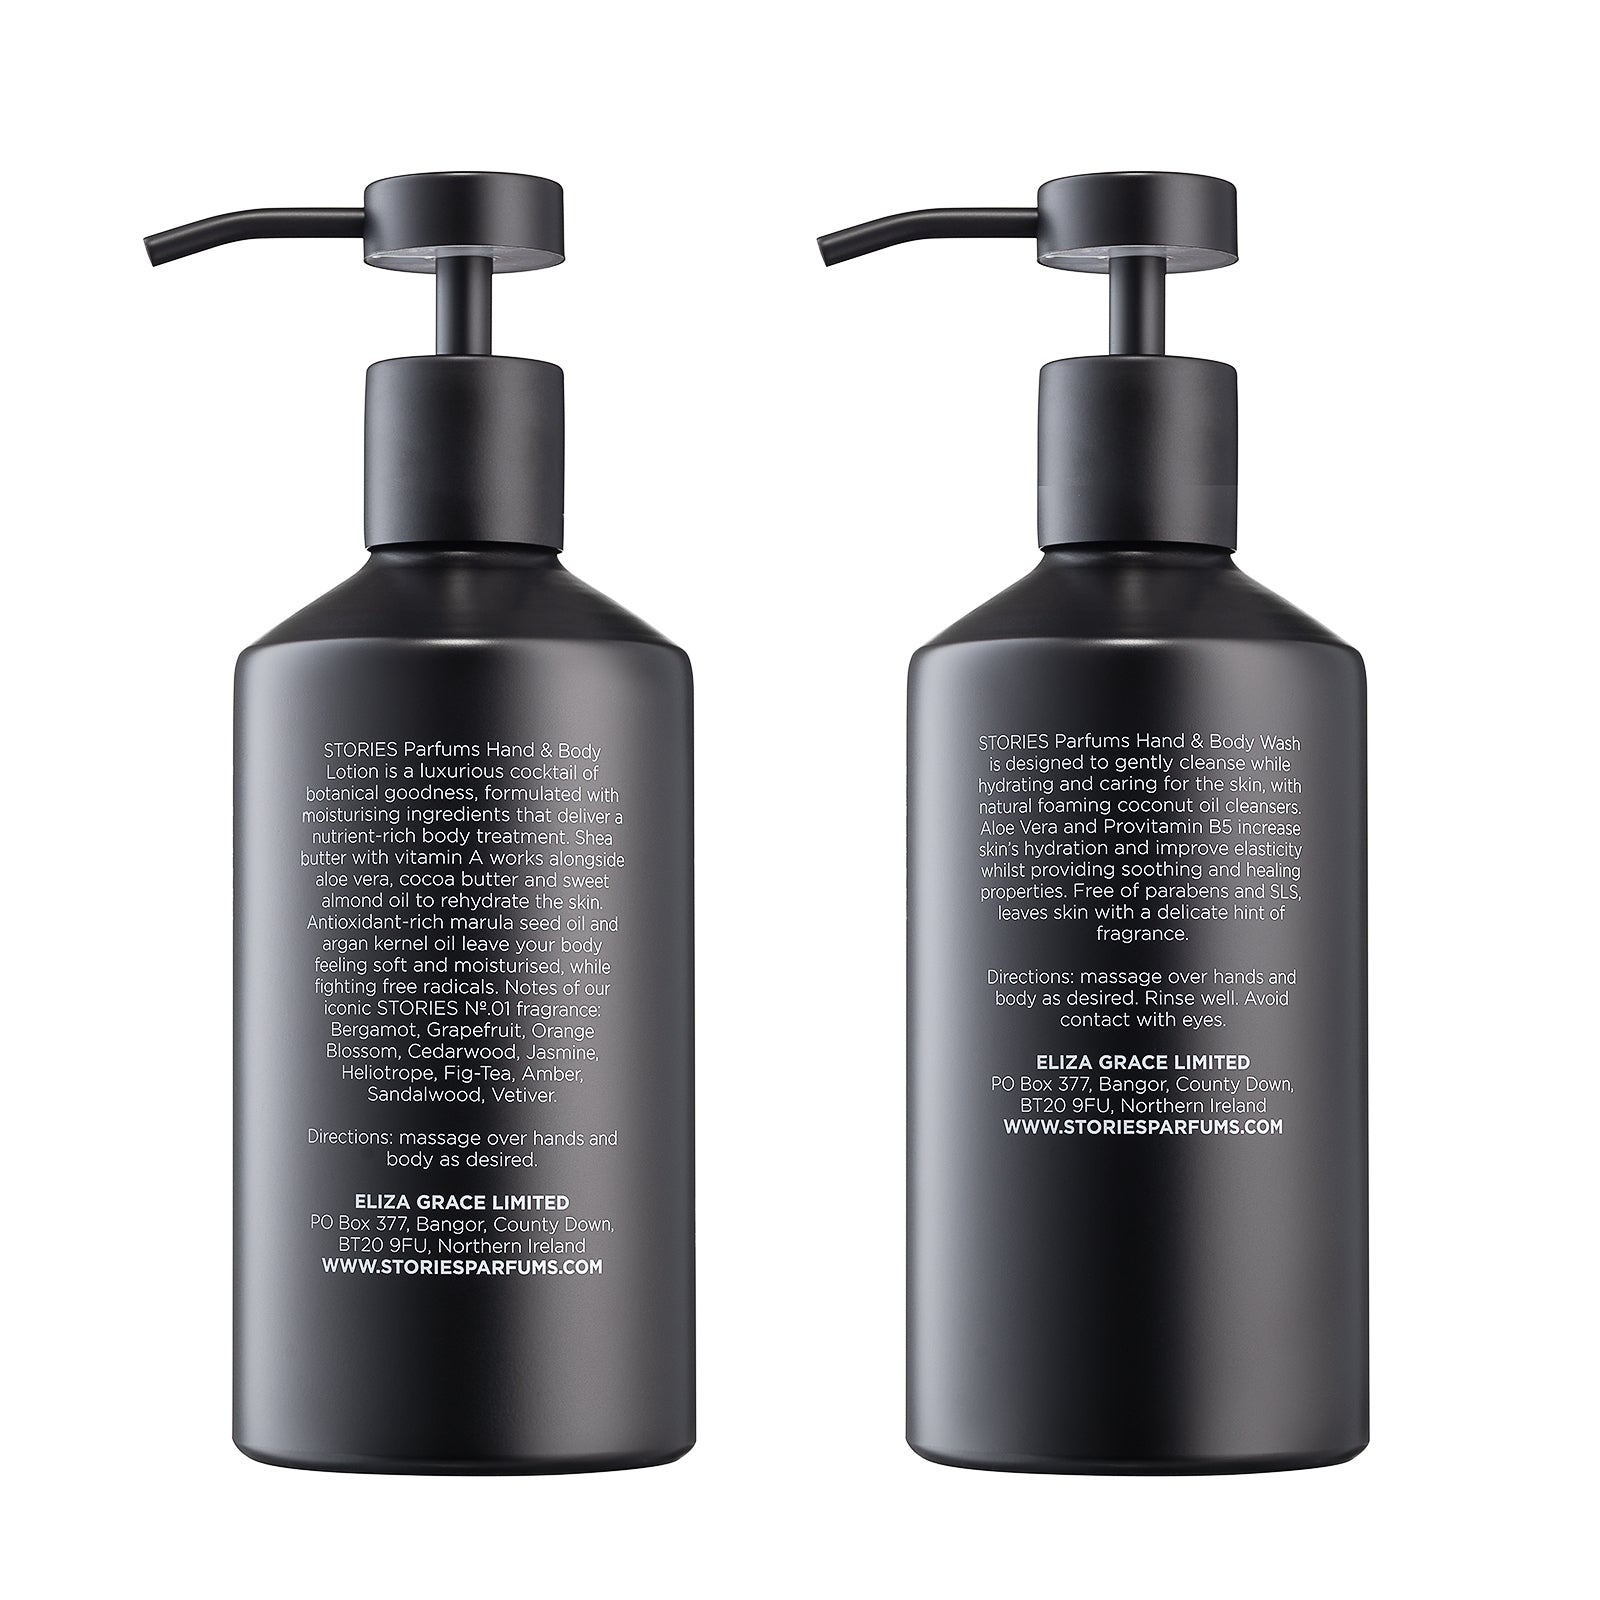 STORIES Nº.01 Hand & Body Care Duo